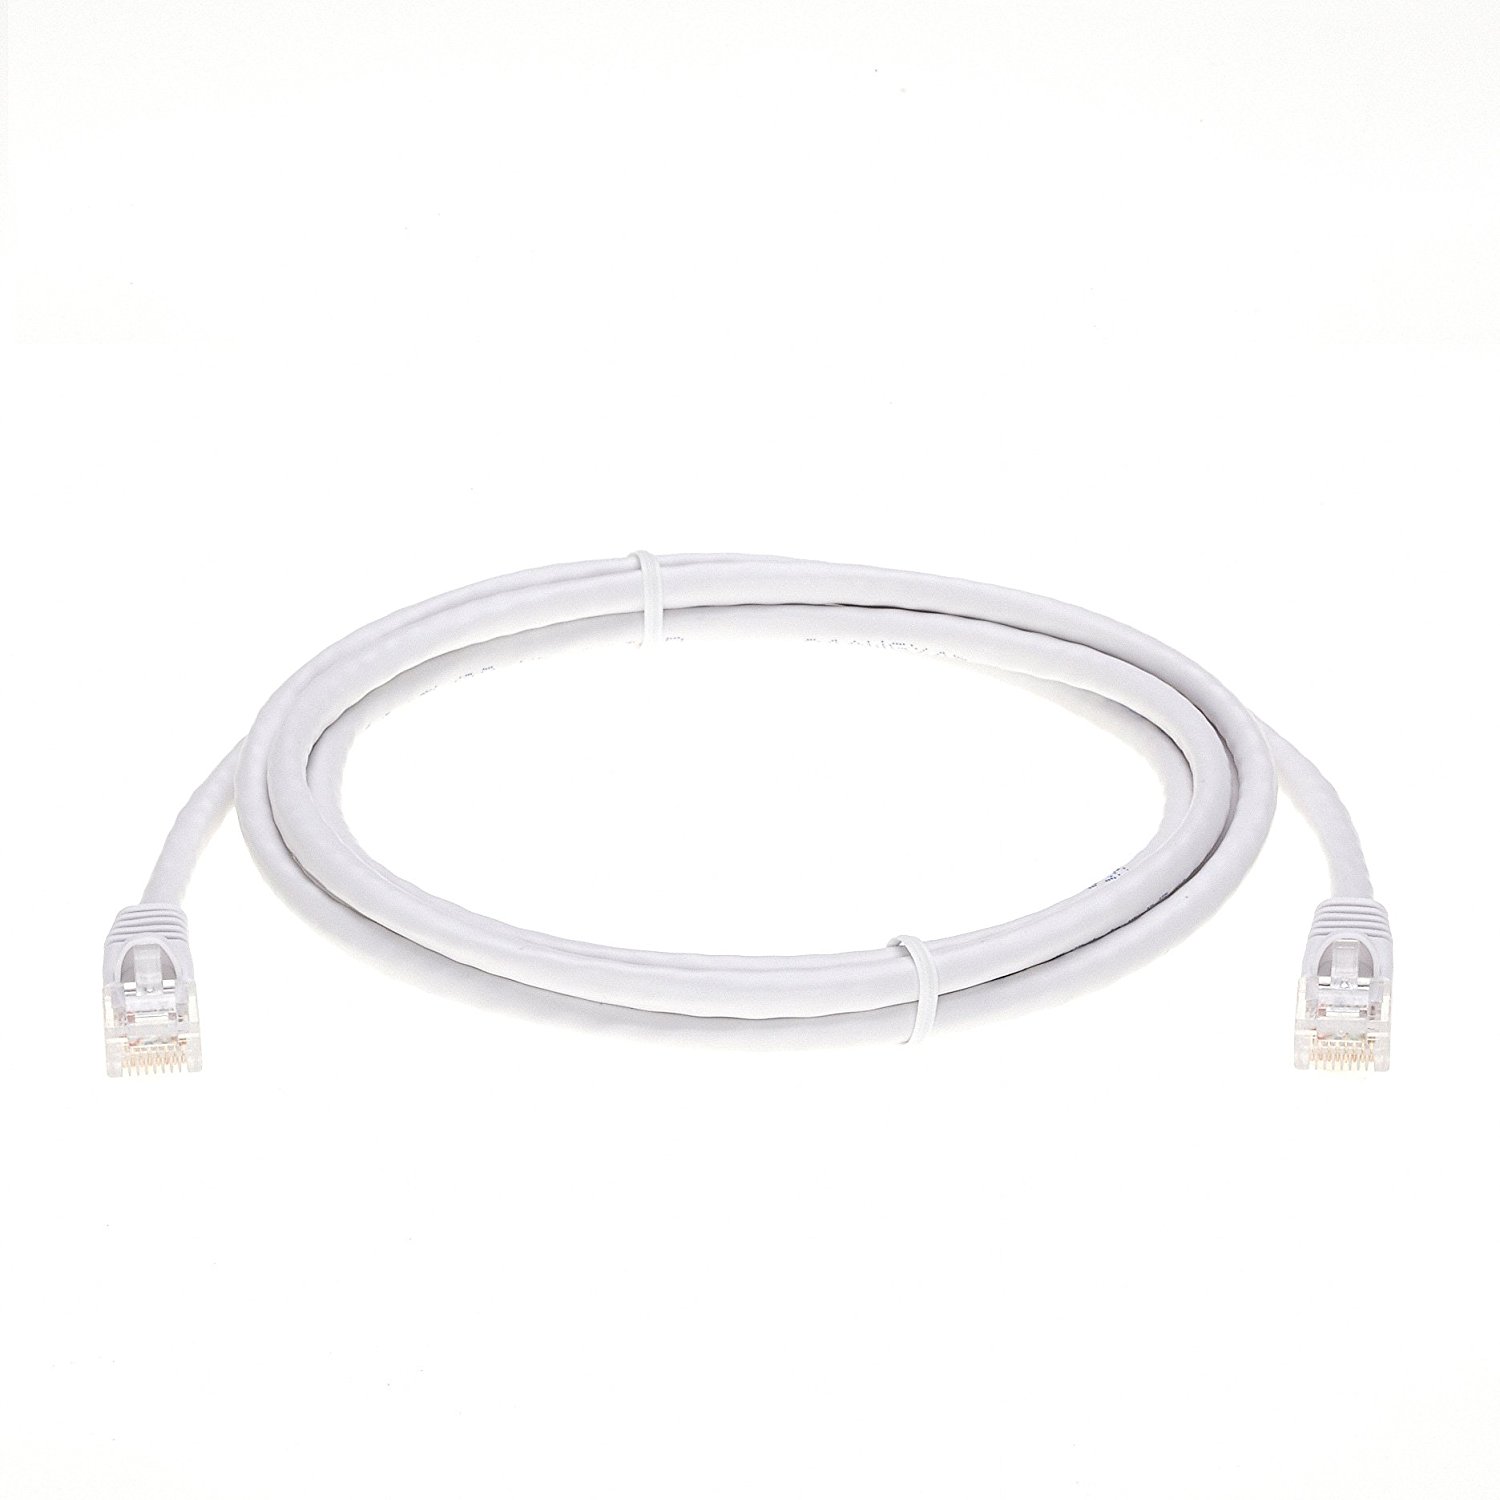 InstallerParts (5 Pack) Ethernet Cable CAT6 Cable UTP Booted 100 FT - White - Professional Series - 10Gigabit/Sec Network / High Speed Internet Cable, 550MHZ - image 4 of 5